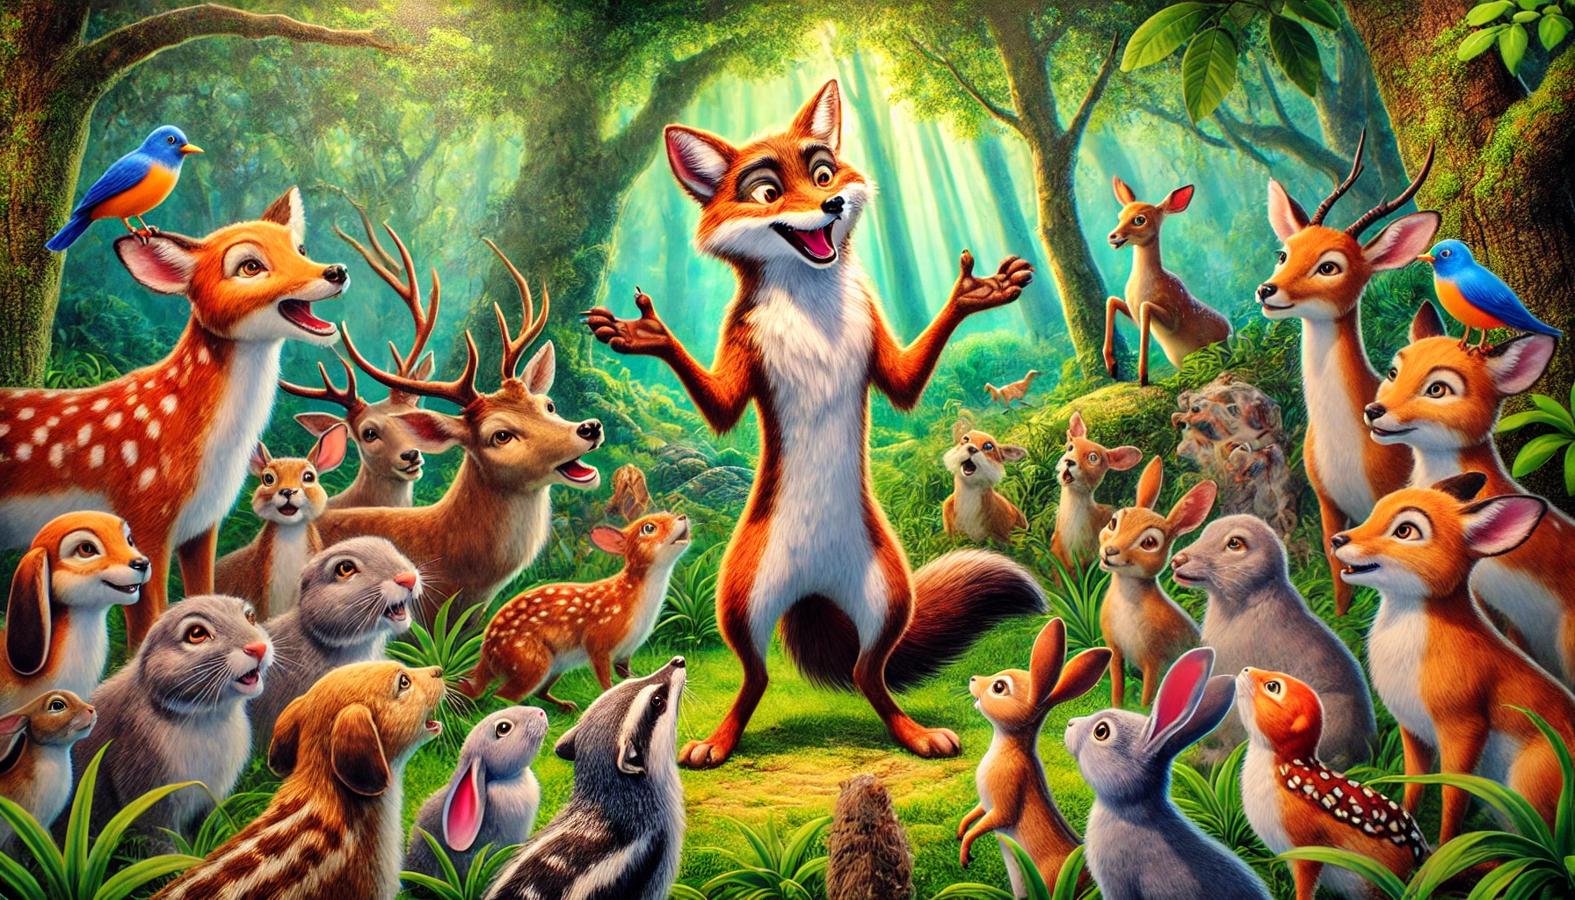 Jackal sharing his story with a group of forest animals gathered around him.